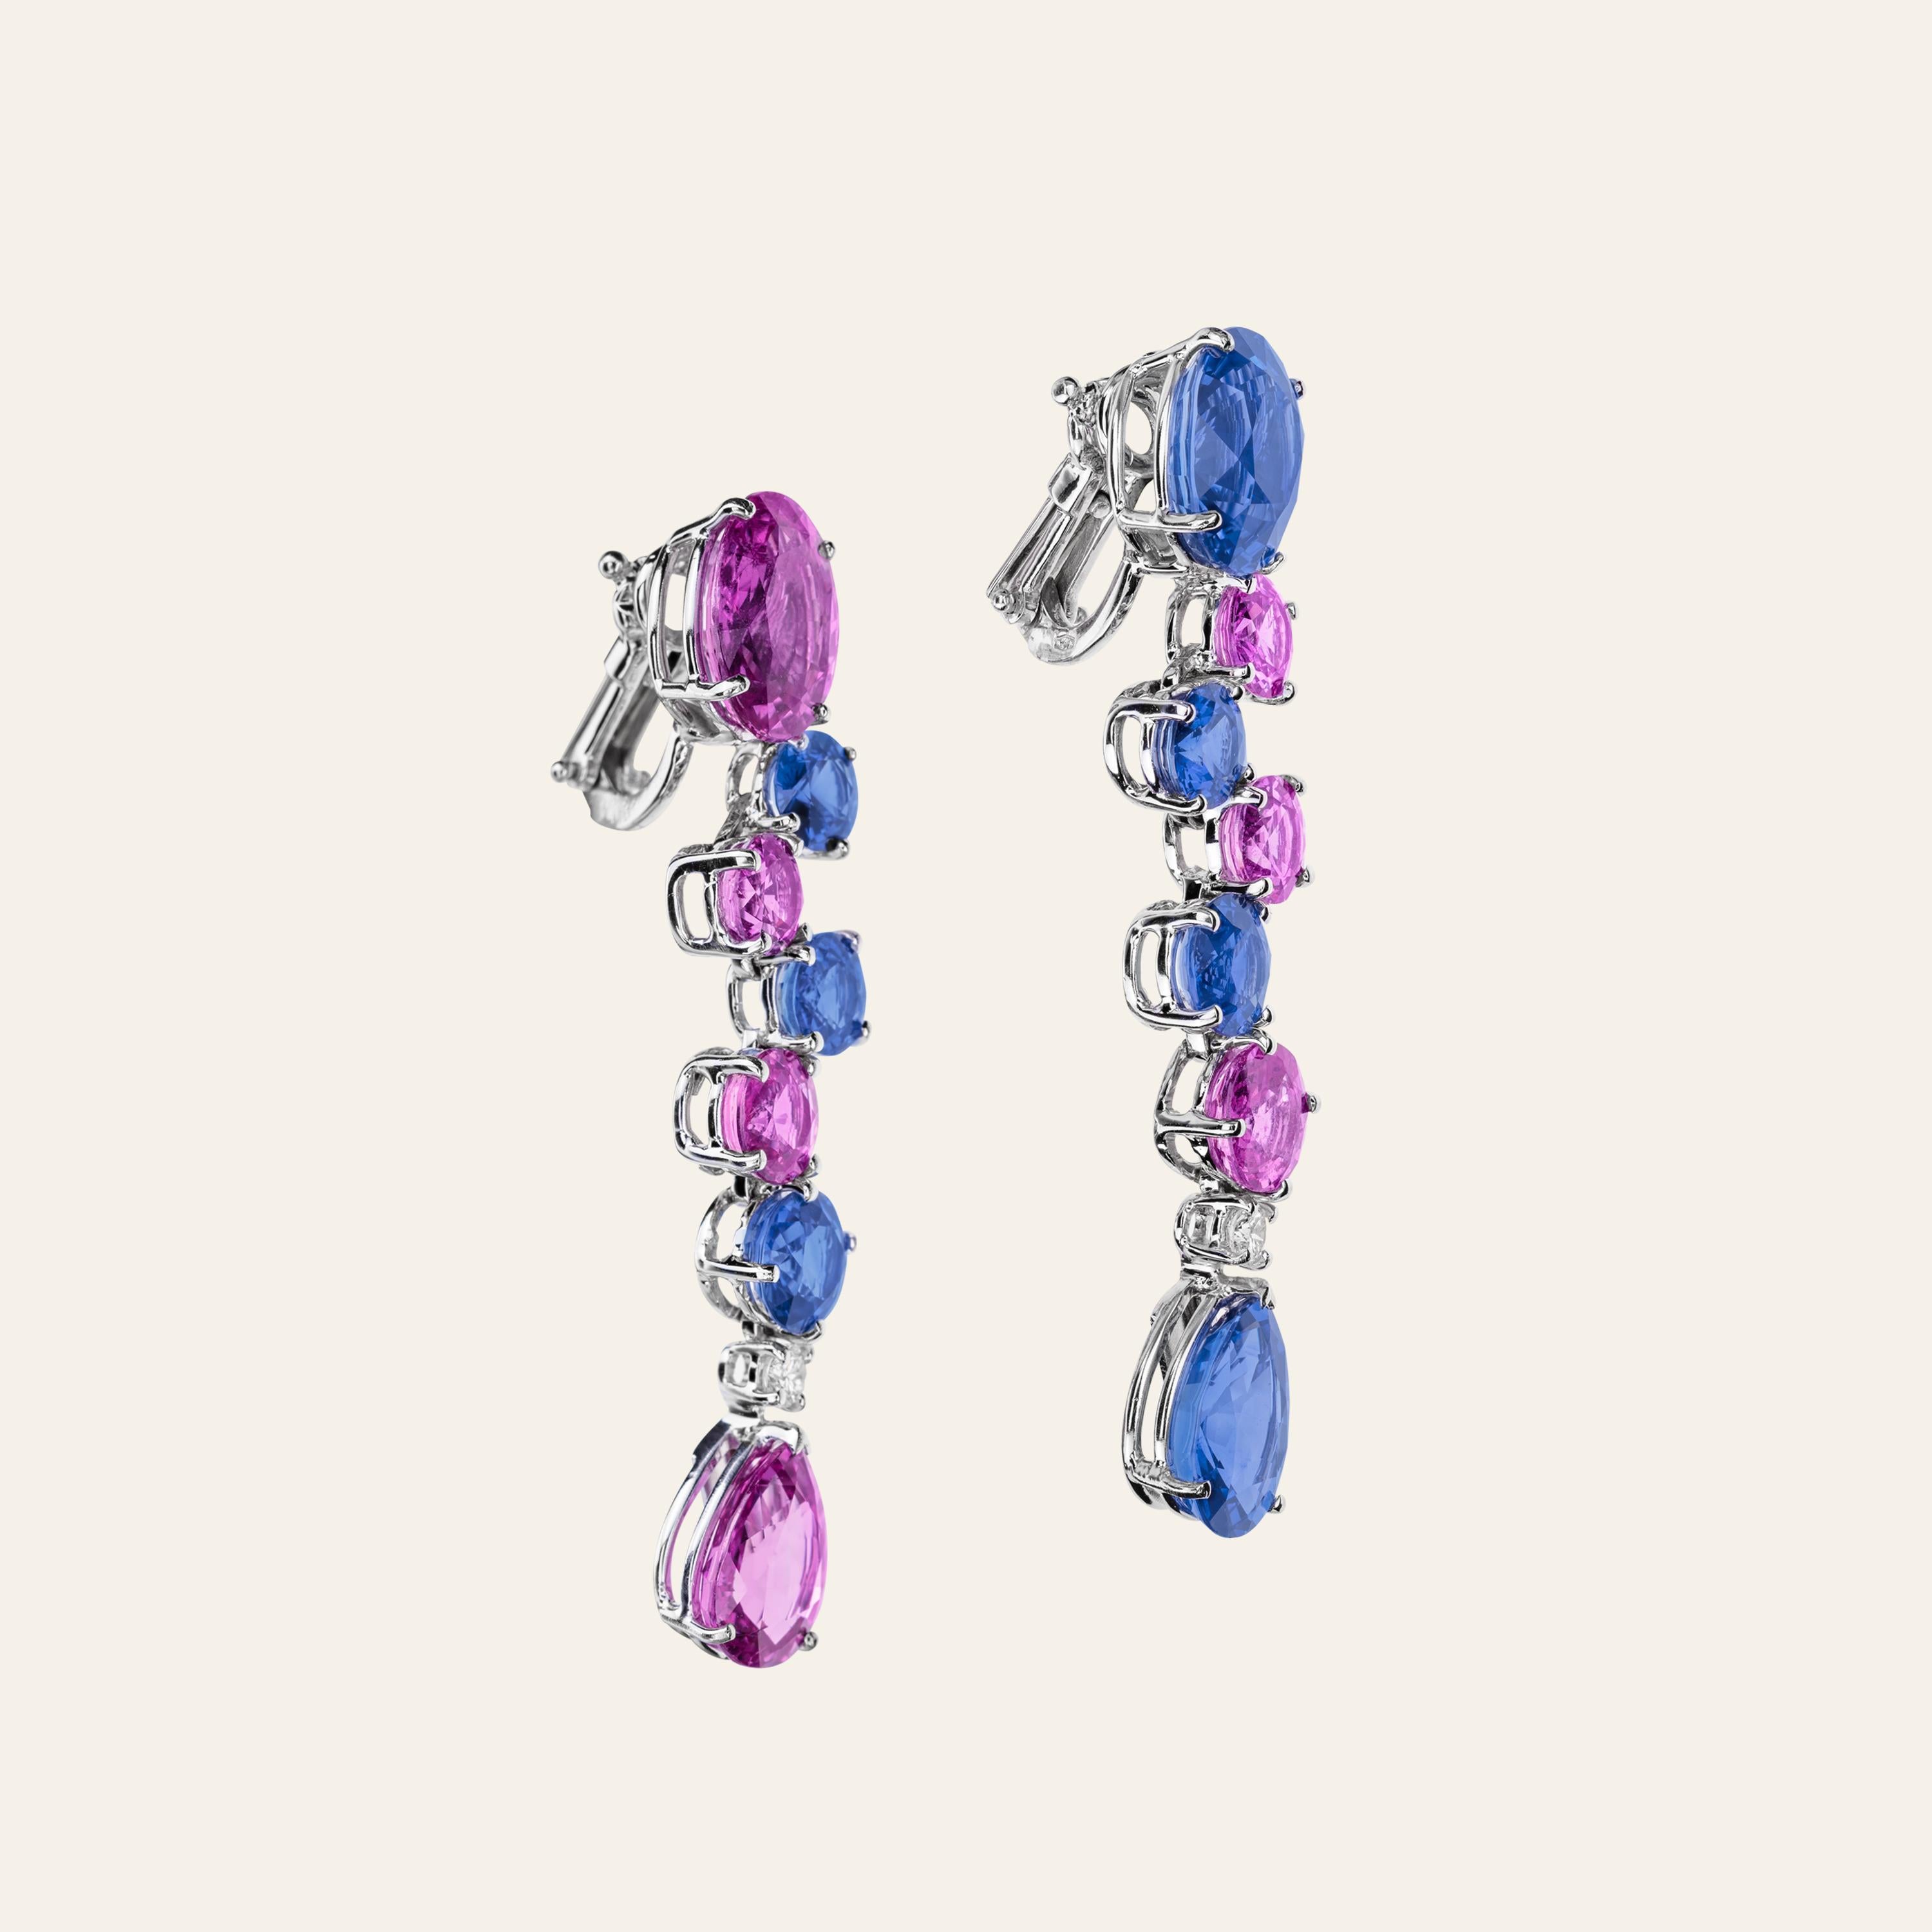 Sabbadini Light Blue And Pink Sapphires Pendant Earrings 
18k White gold earrings. Oval, round and pearshape cut blue and pink Ceylon sapphires 24,62 carats, round cut diamonds 0,19 carats. 
White Gold 22,20grams
Handmade & designed in Milan, in Via